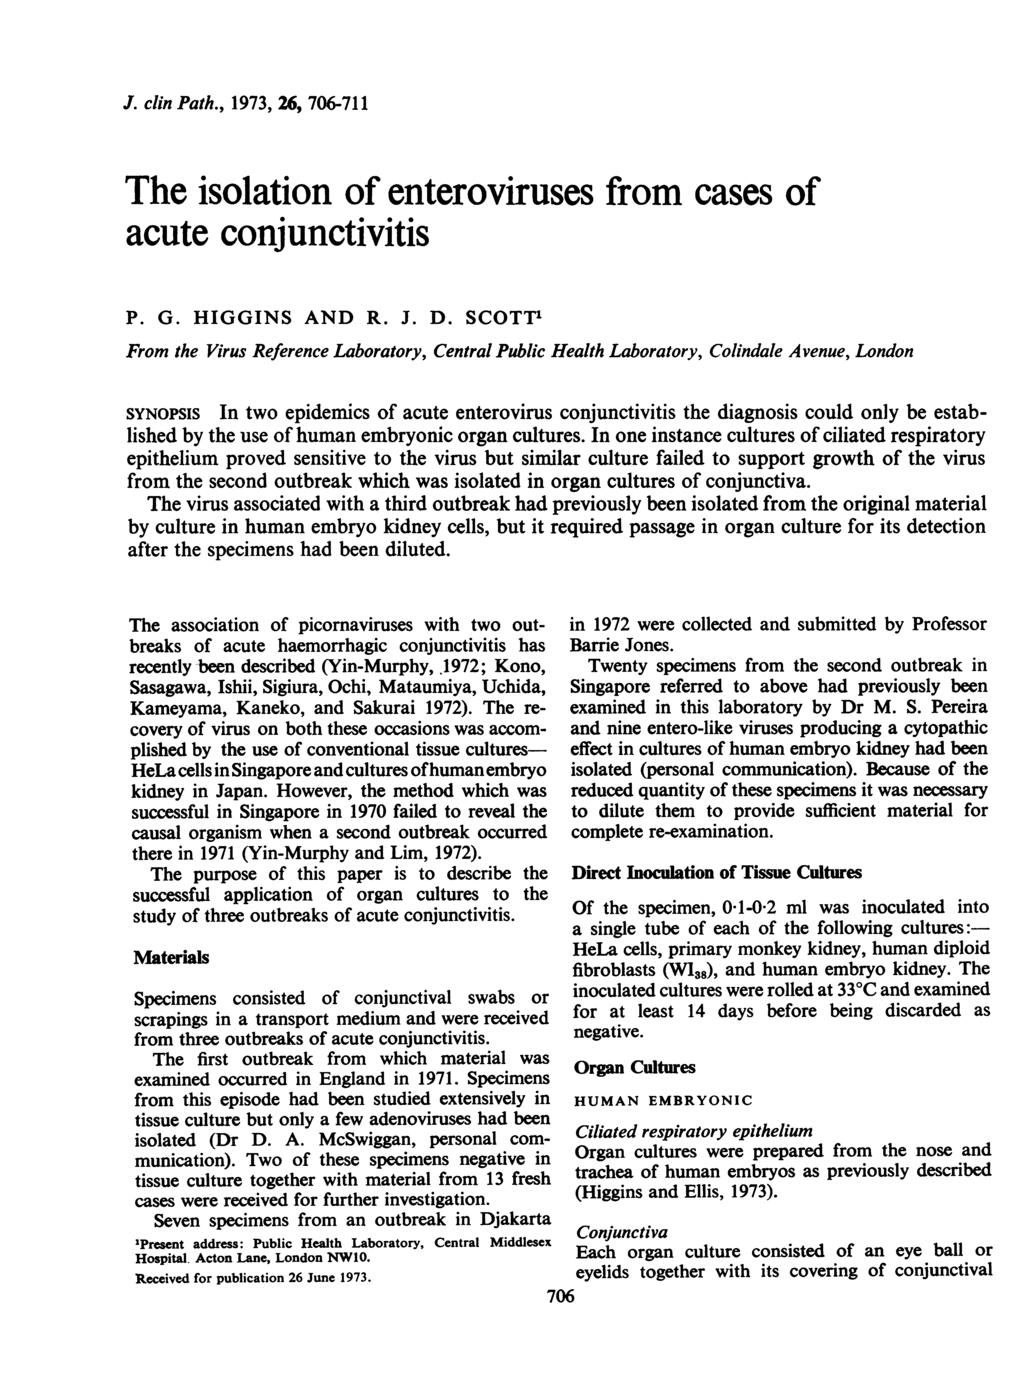 J. clin Path., 1973, 26, 706-711 The isolation of enteroviruses from cases of acute conjunctivitis P. G. HIGGINS AND R. J. D.